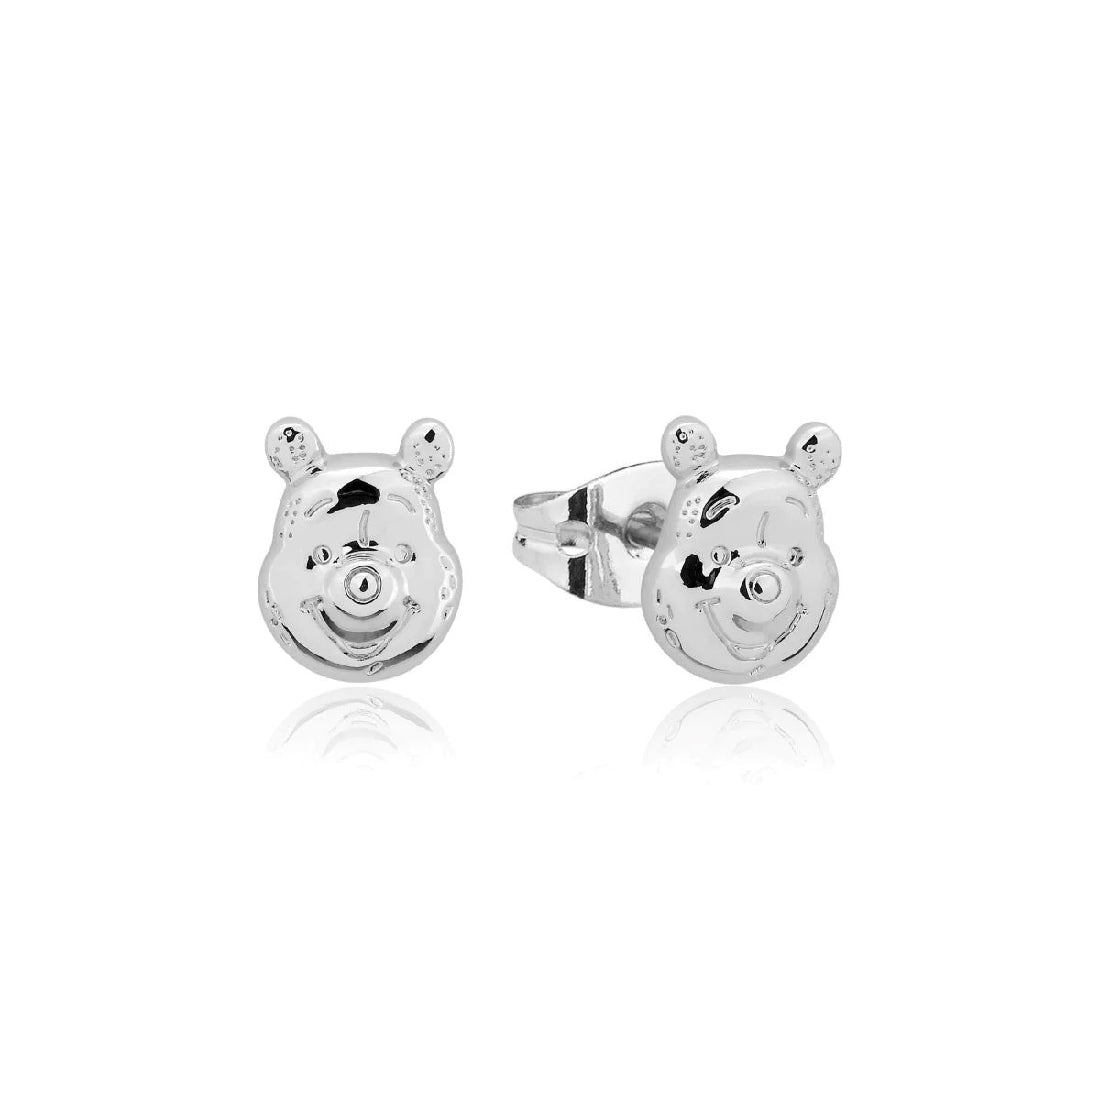 DISNEY COUTURE KINGDOM WINNIE THE POOH STUD EARRINGS WHITE GOLD PLATED